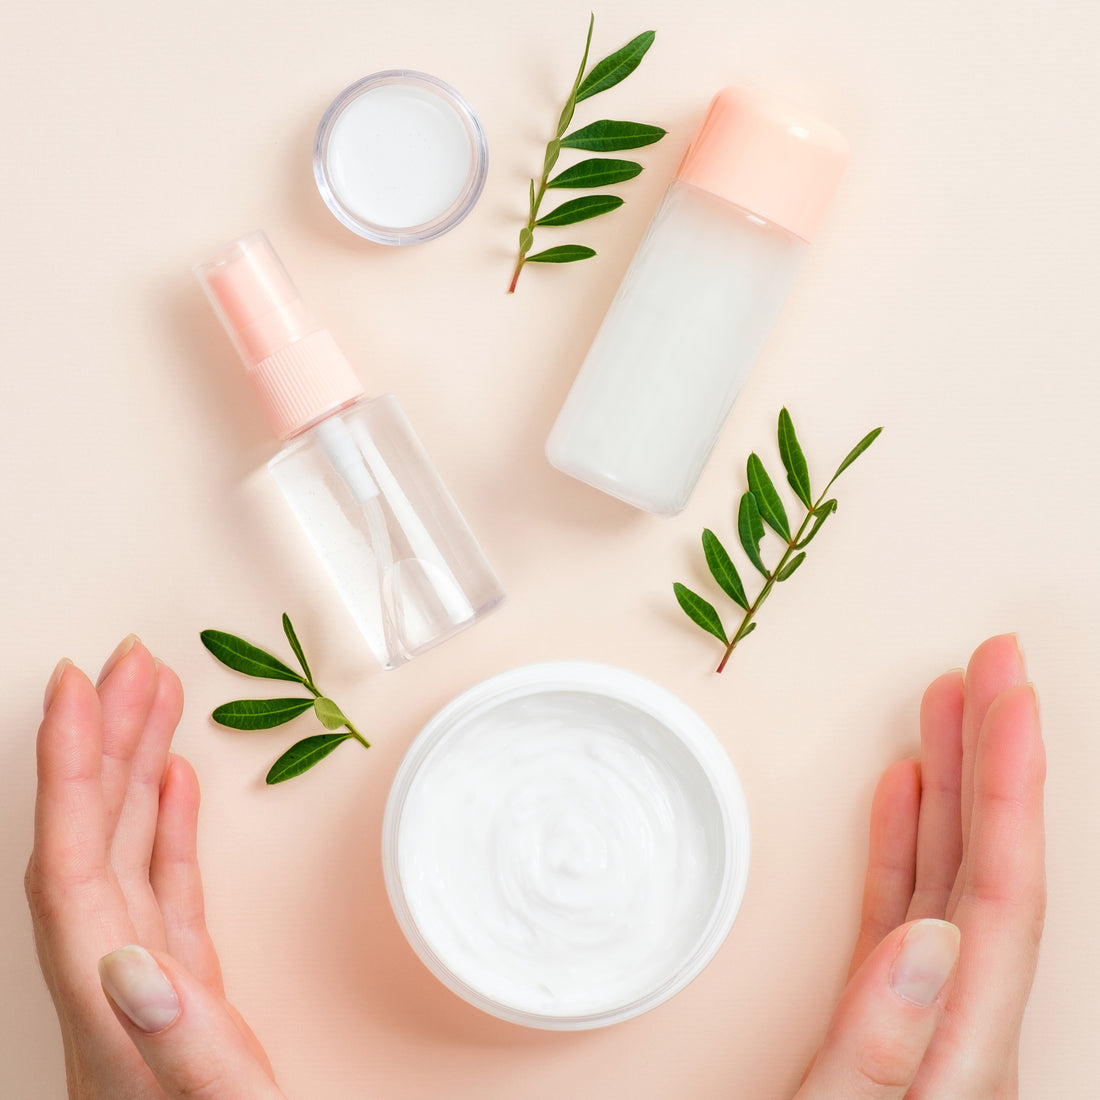 Tips for Making Natural Cosmetic Products for Your Business